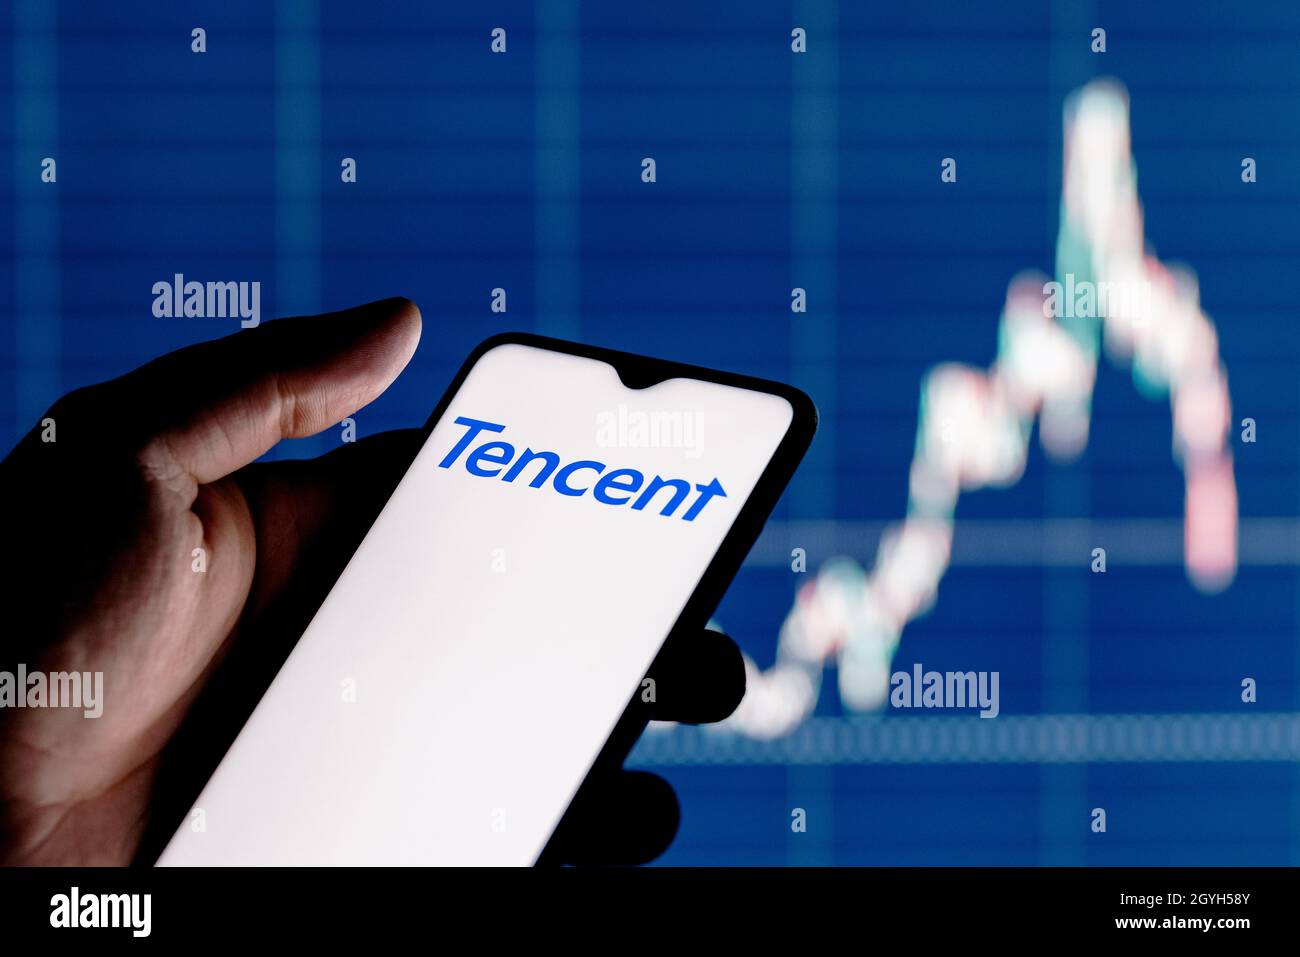 A smartphone with the Tencent logo in a hand. Stock chart on the background. Stock Photo